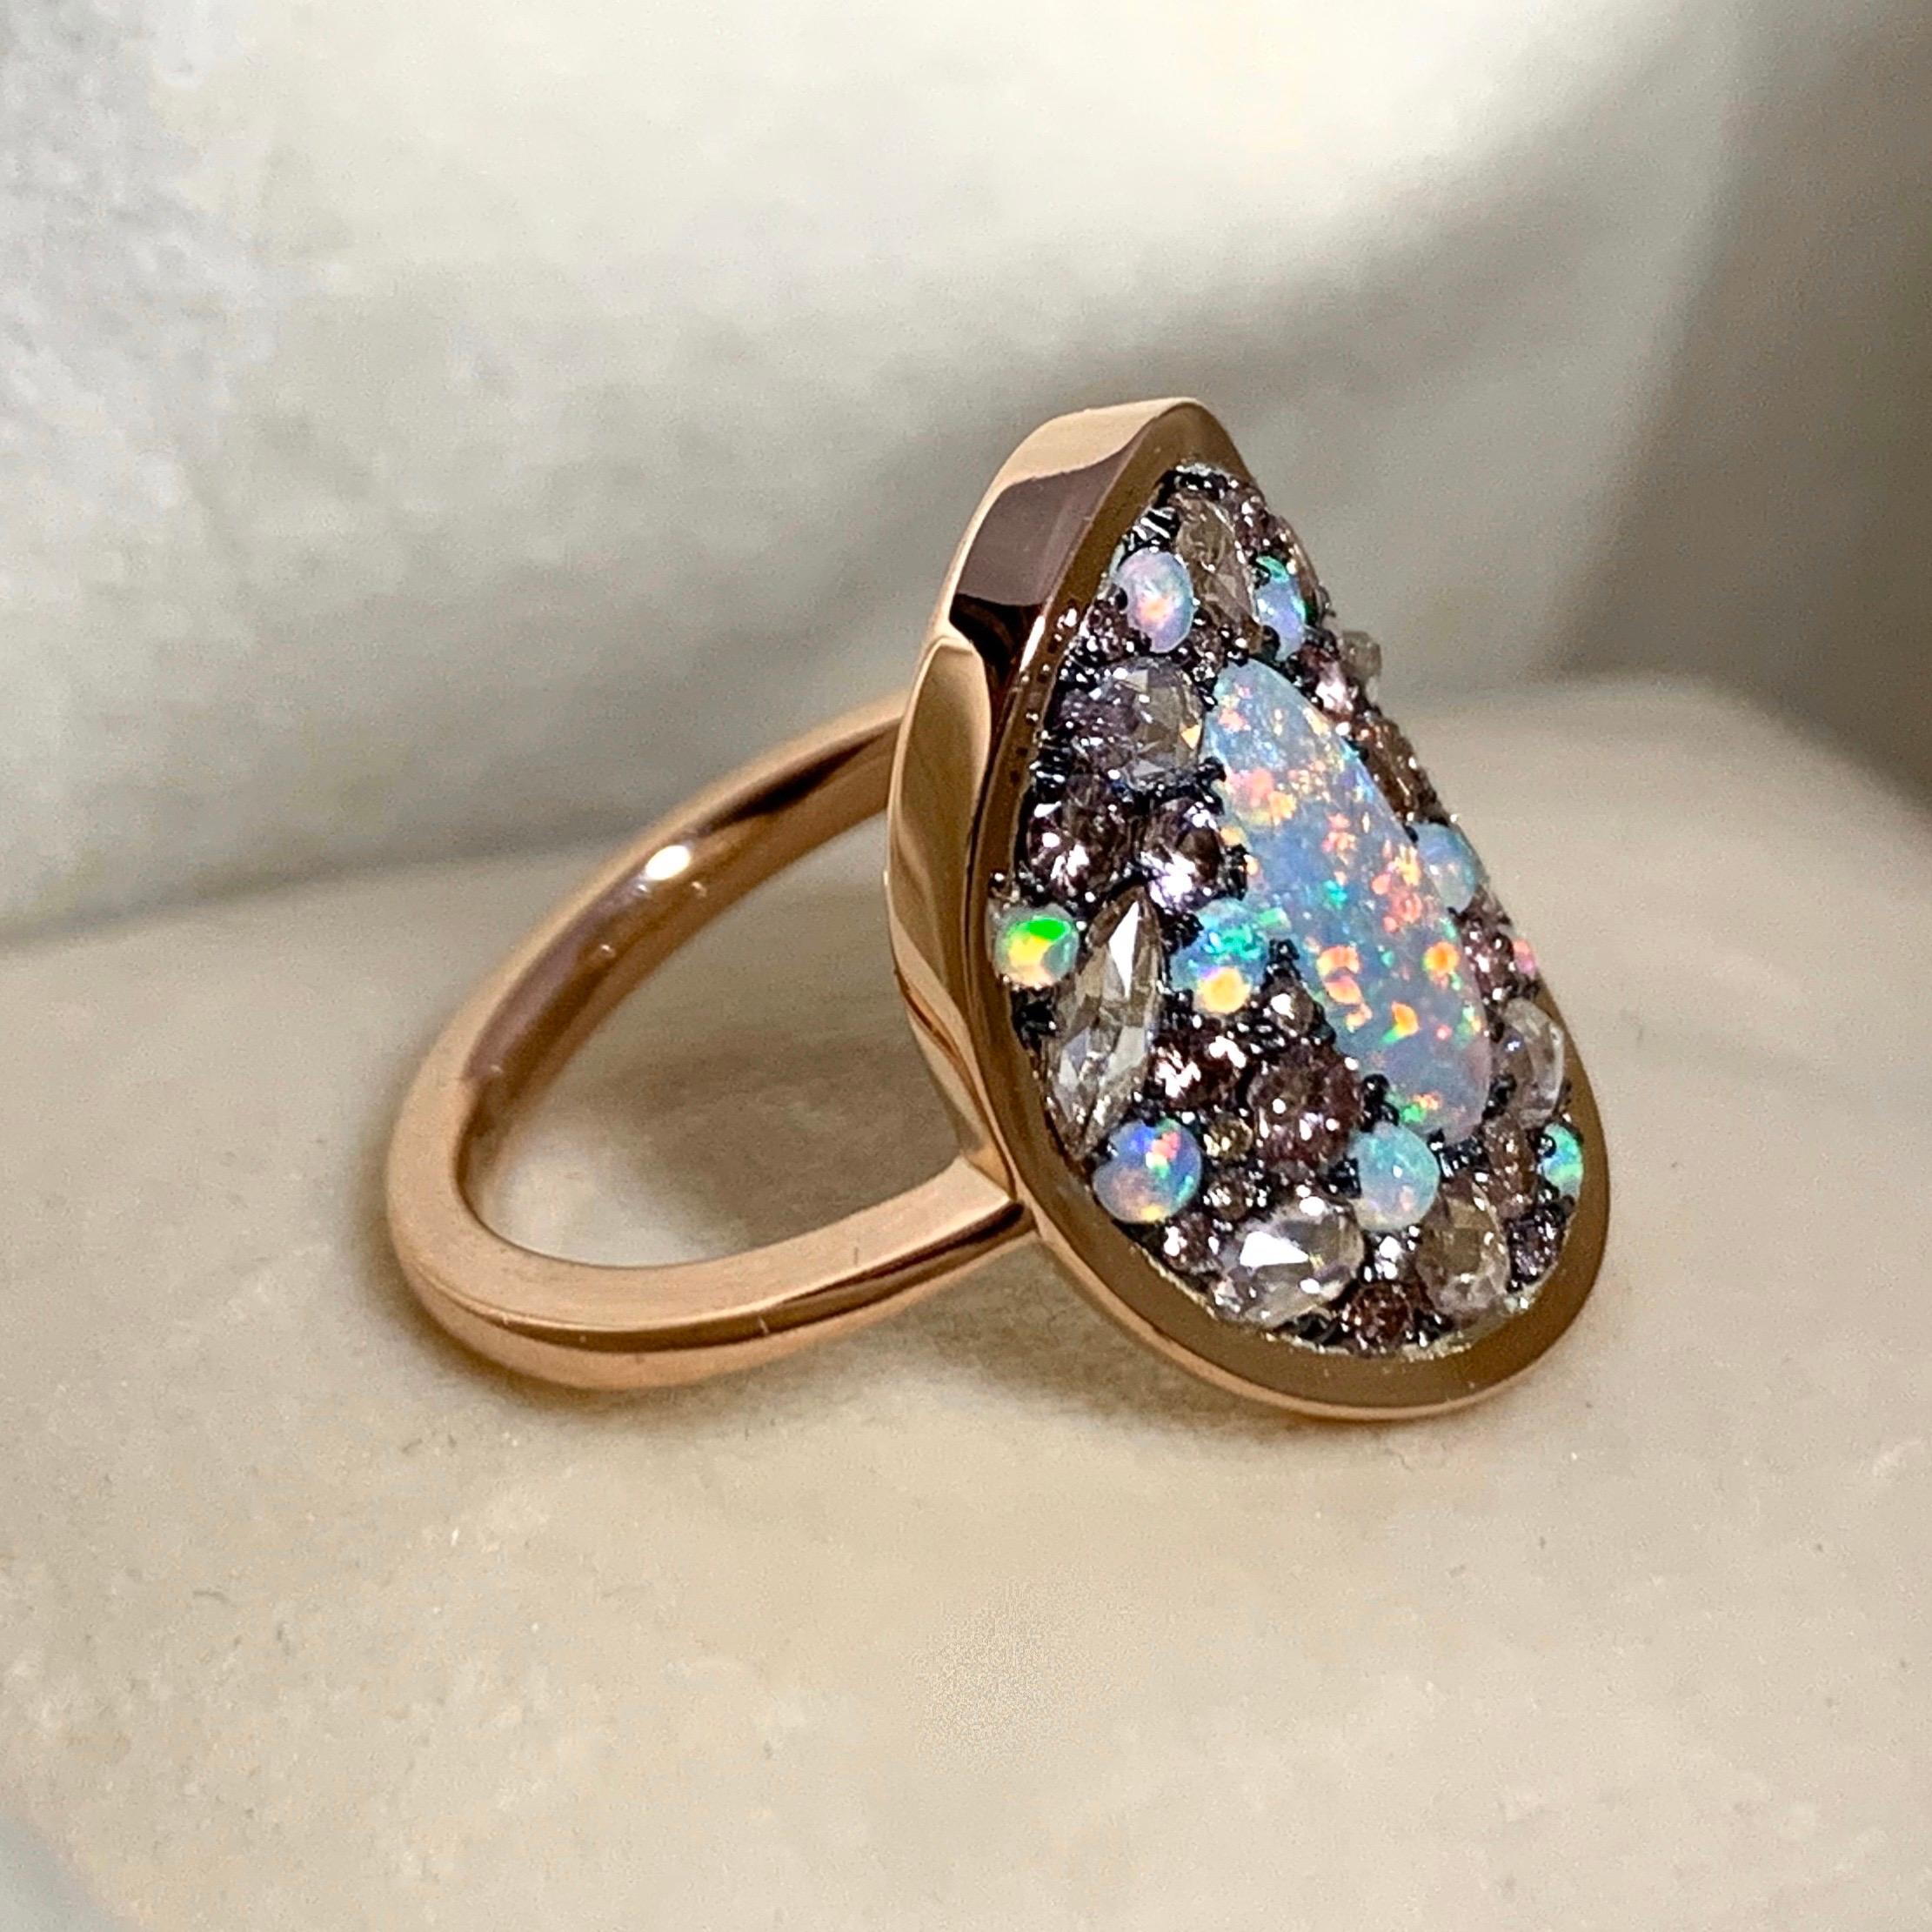 One of a kind ring handmade in Belgium by jewellery artist Joke Quick, in 18K rose gold 5,4 g & blackened sterling silver 2 g (The stones are set on silver to create a black background for the stones.)
Dark Opal centerstone from Lightning Ridge Mine